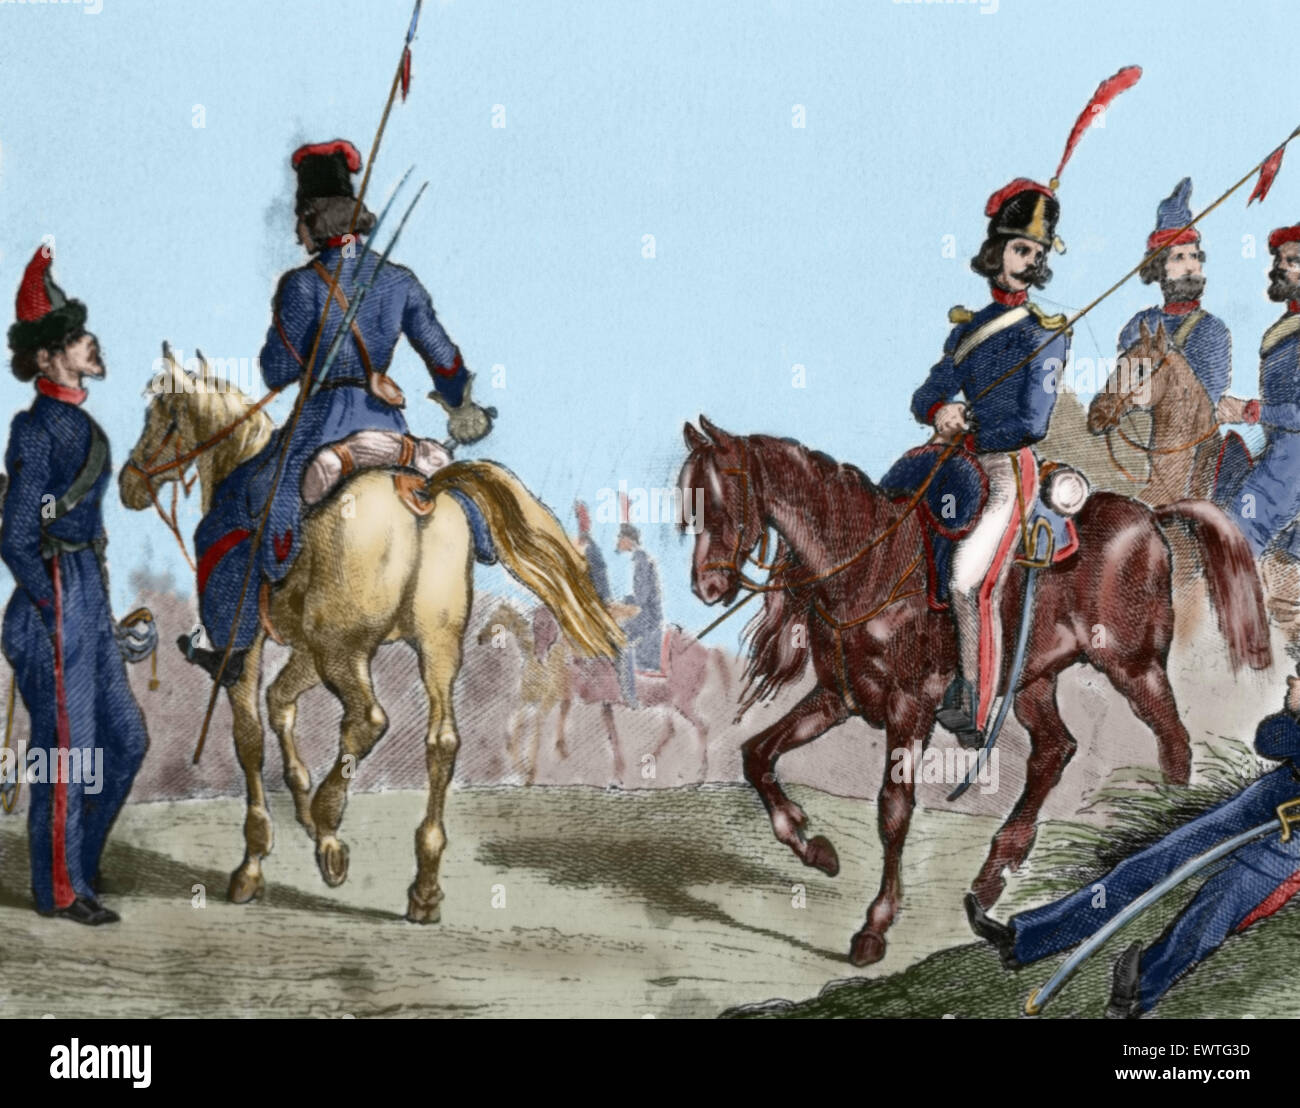 Russian militaries. Cossacks. Engraving. 18th century. Colored. Stock Photo